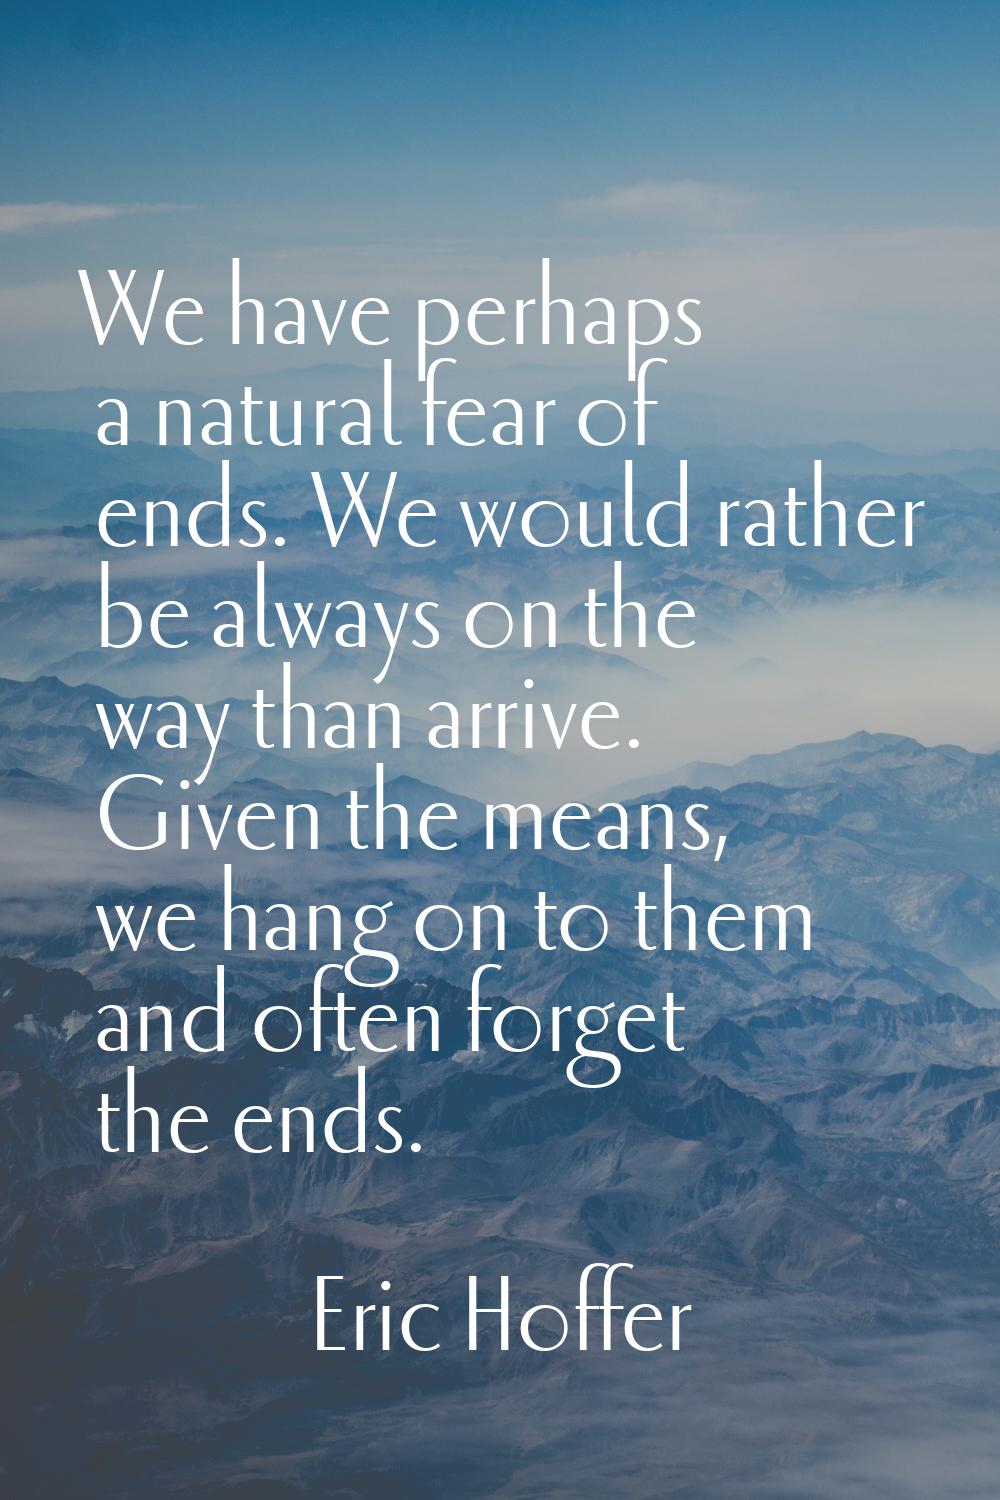 We have perhaps a natural fear of ends. We would rather be always on the way than arrive. Given the